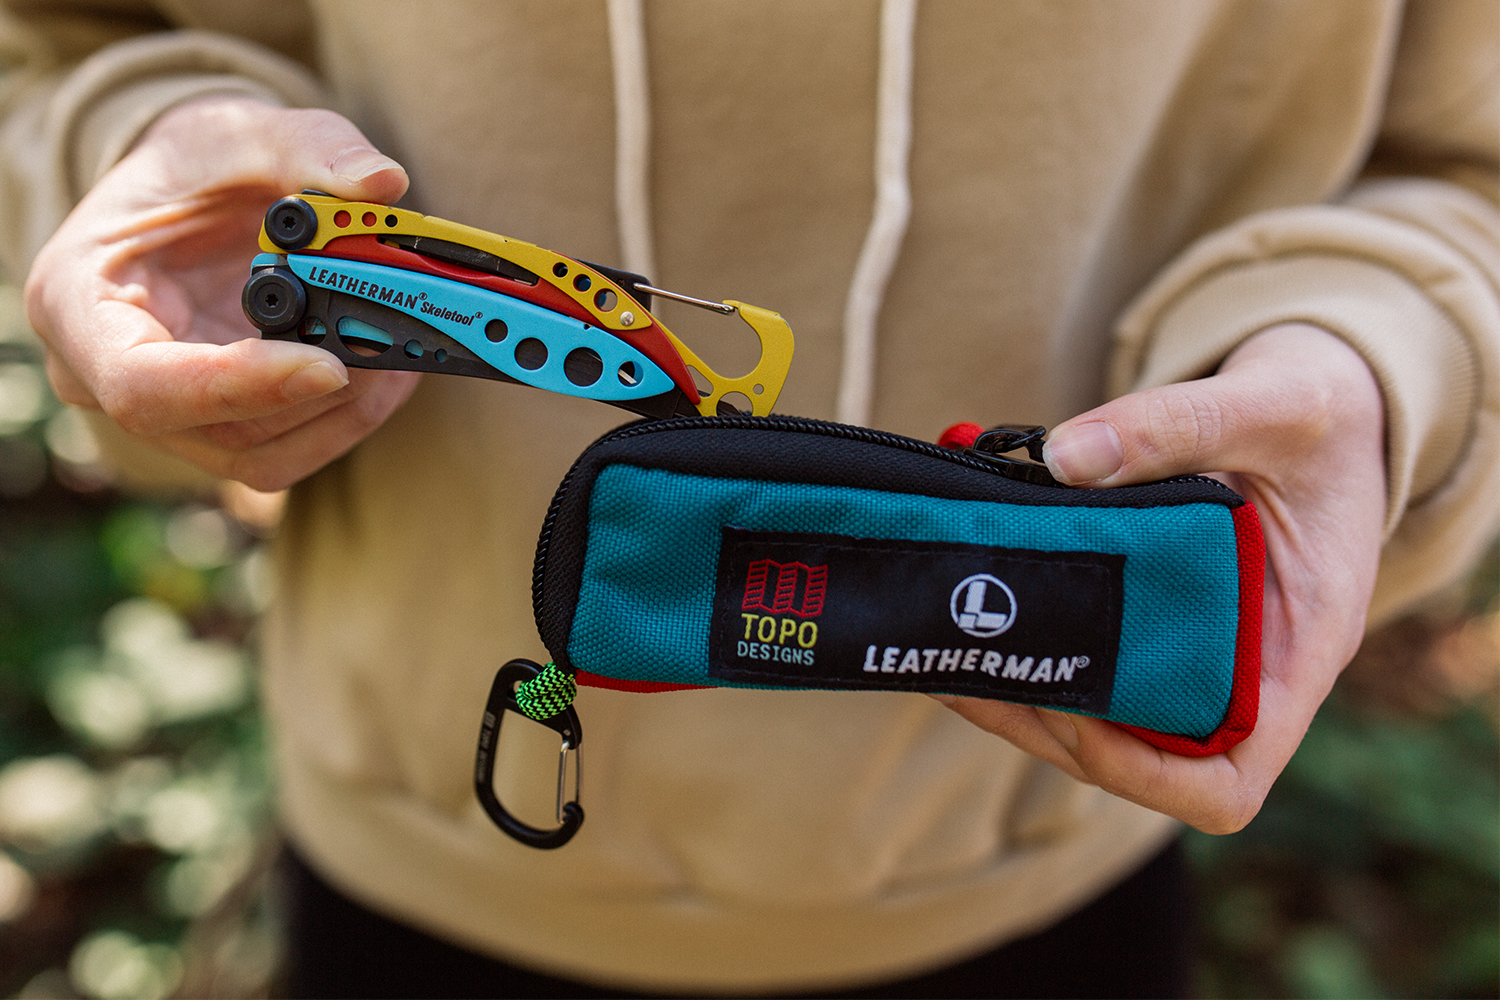 Leatherman's Topo Designs Skeletool, a plier-based multi-tool featuring a custom nylon sheath from the outdoor brand